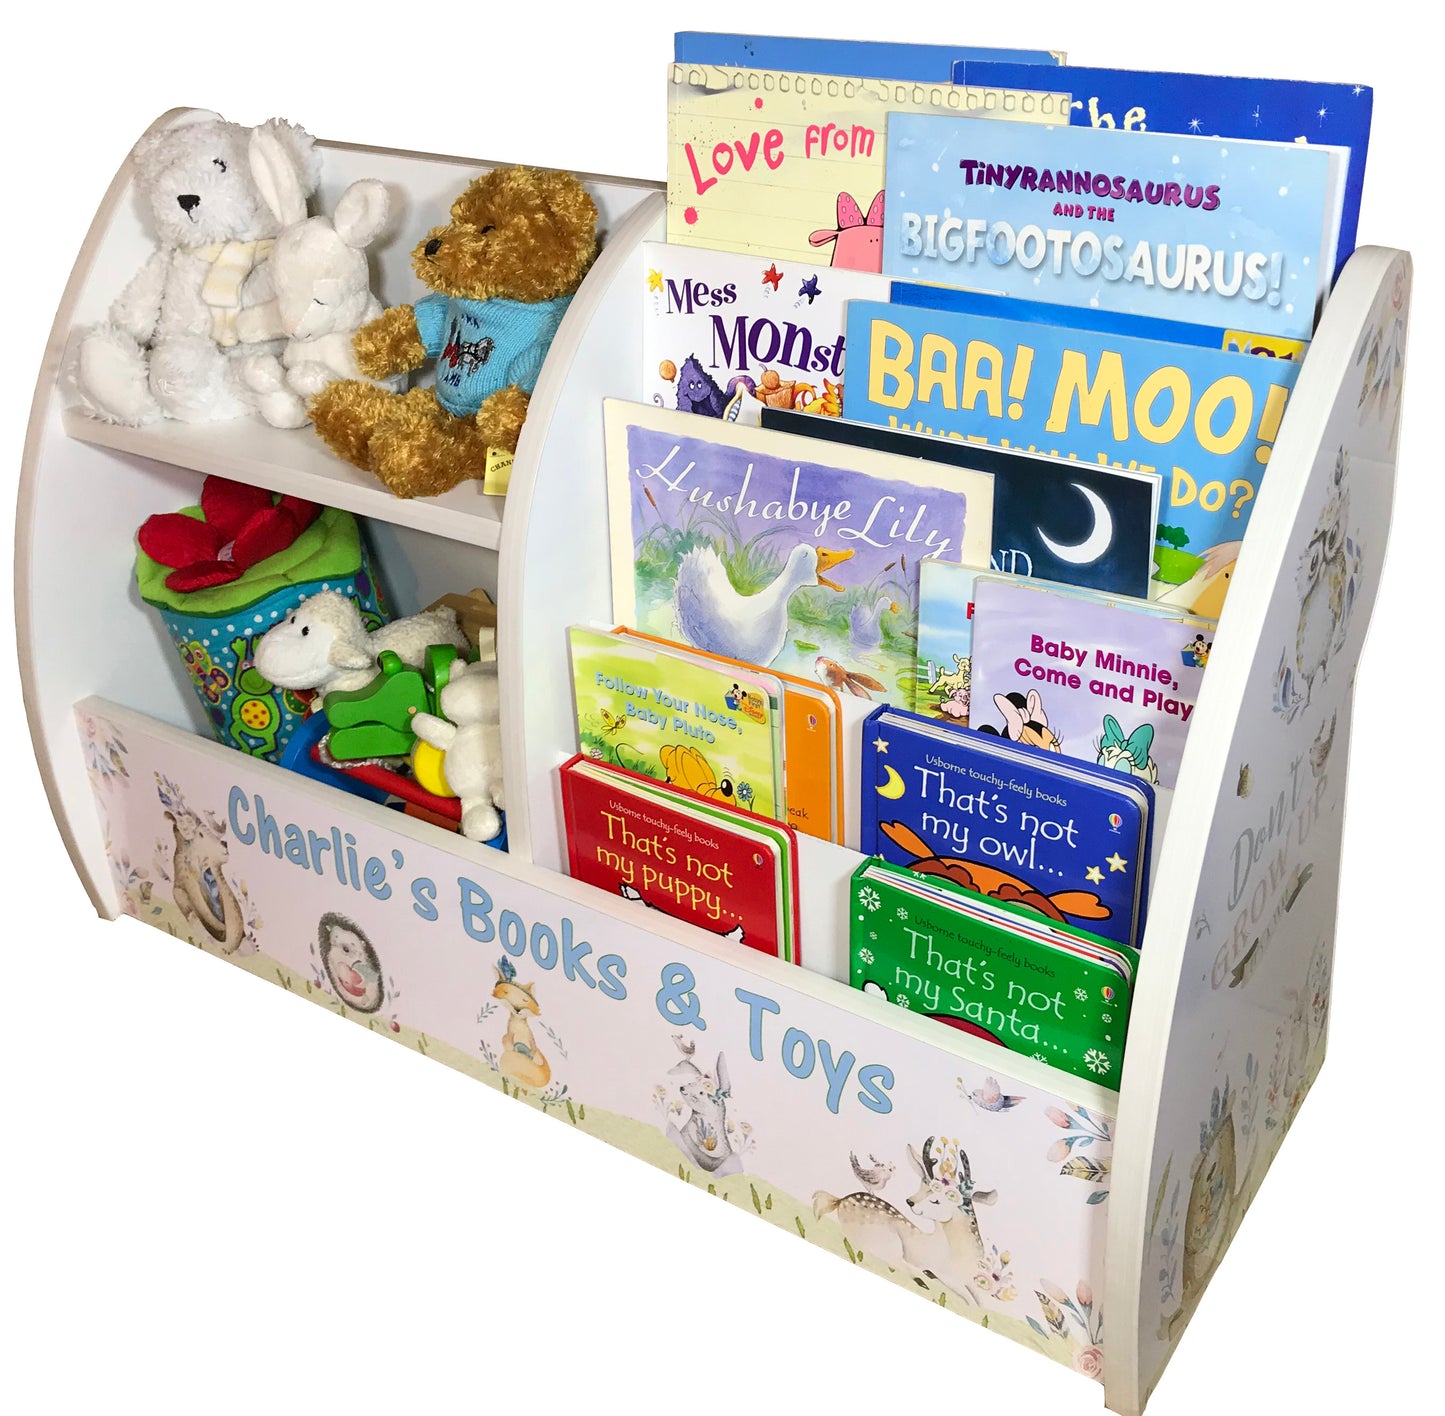 Transport Books and Toys Stand